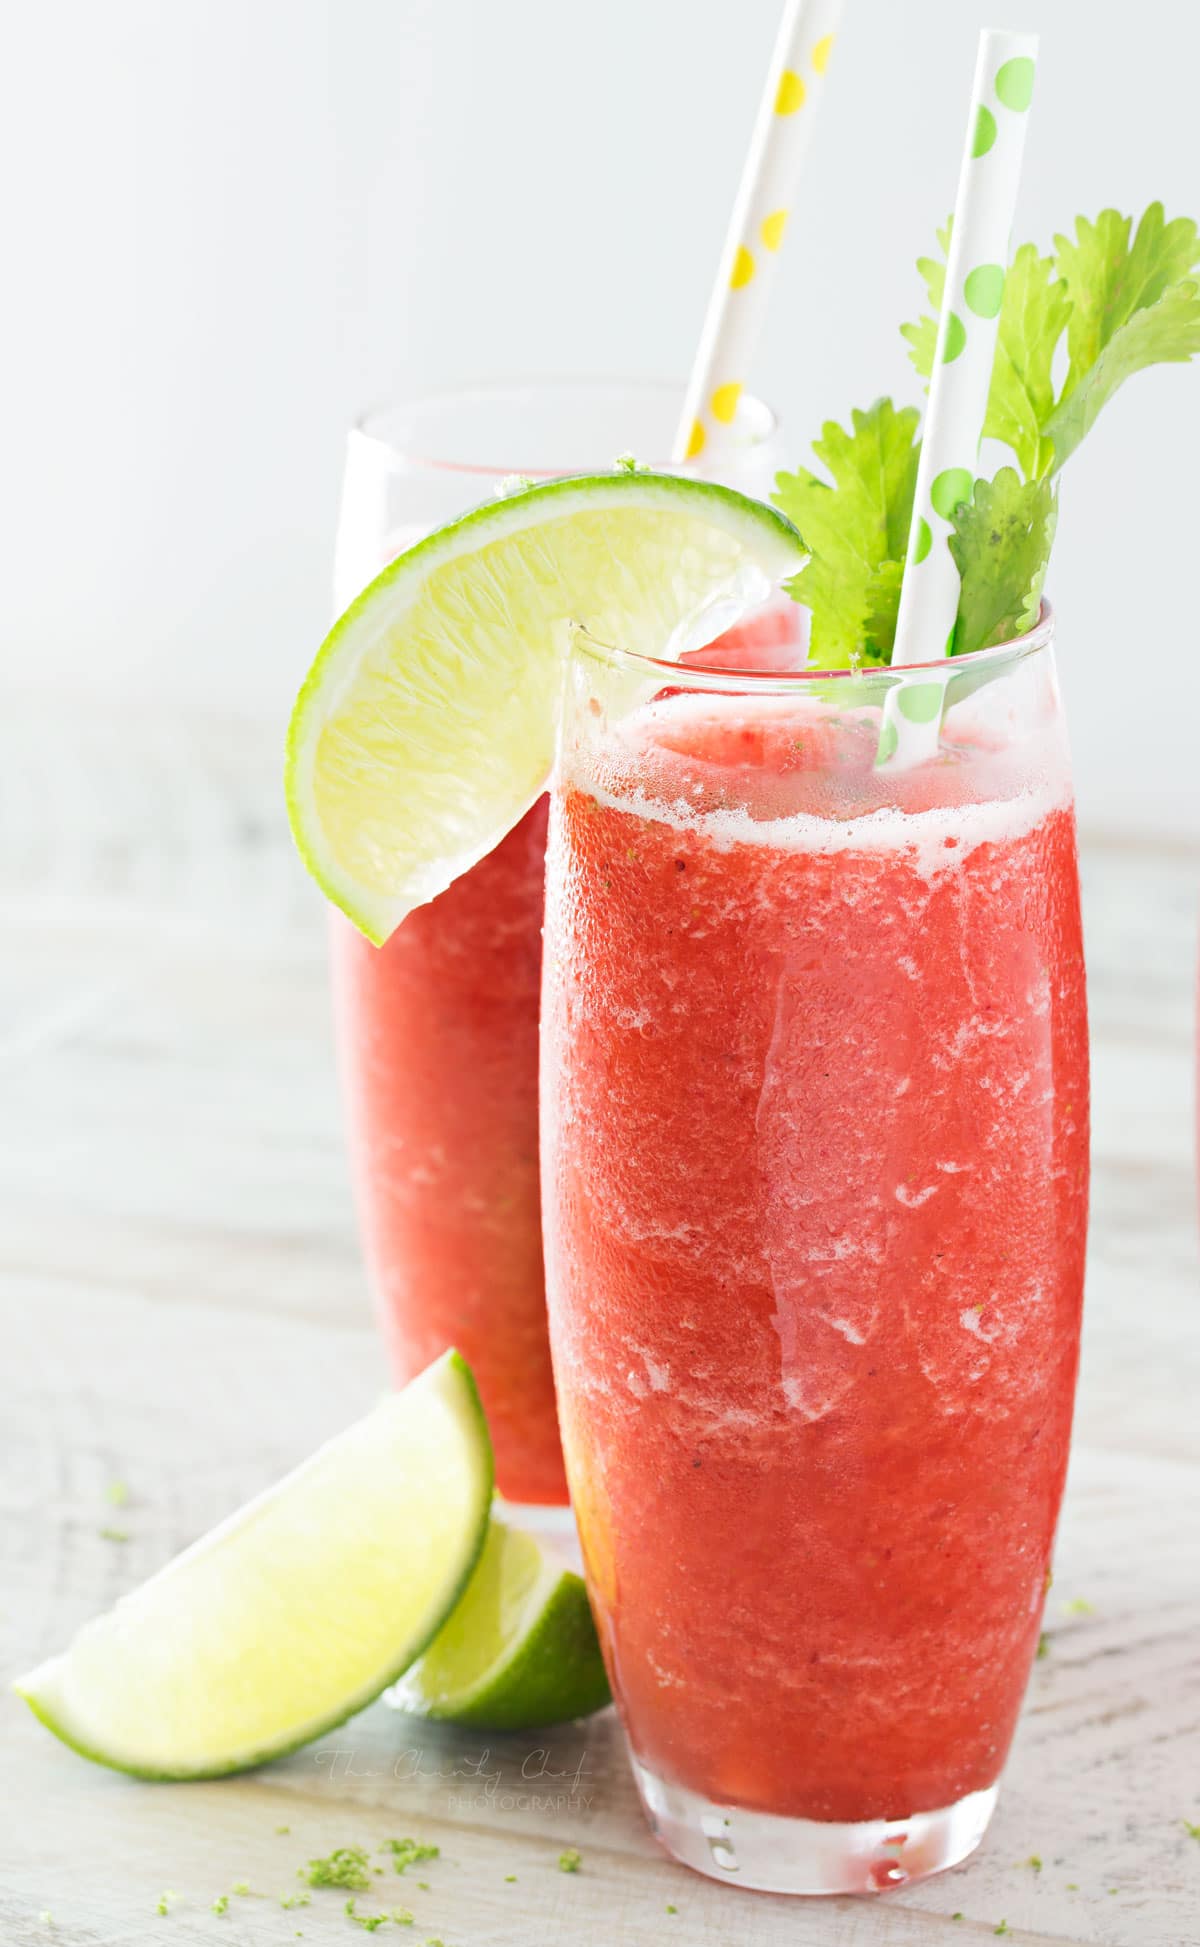 Boozy Strawberry Limeade Slushies | These slushies take just 5 ingredients, including ice, and you're on your way to slushy heaven! | http://thechunkychef.com